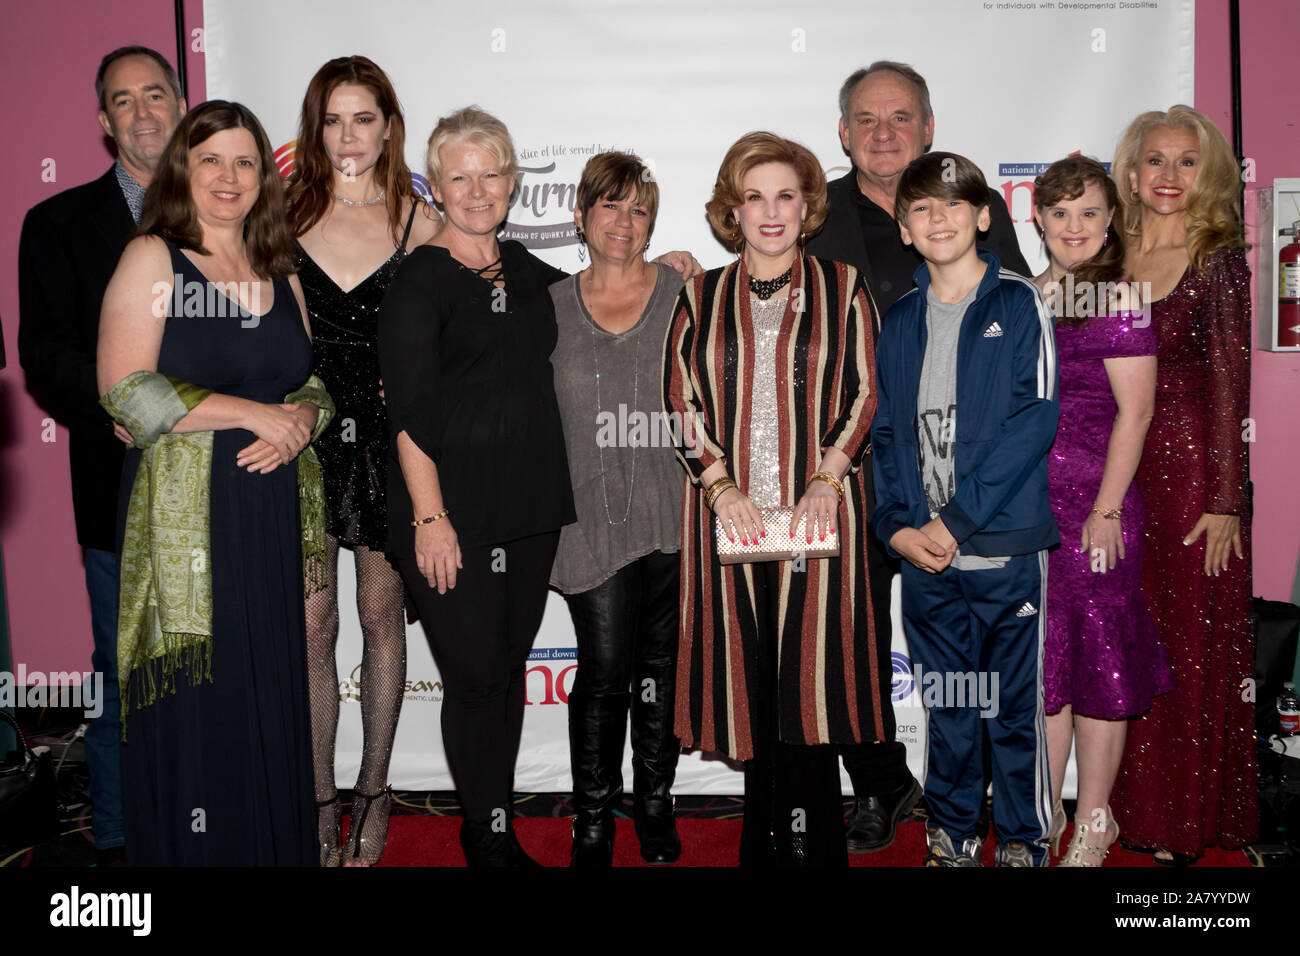 VAN NUYS, CALIFORNIA - NOVEMBER 1, 2019: Turnover Theatrical Film Premiere at the Regency Theater. Celebrities, cast and crew, family and friends were Stock Photo